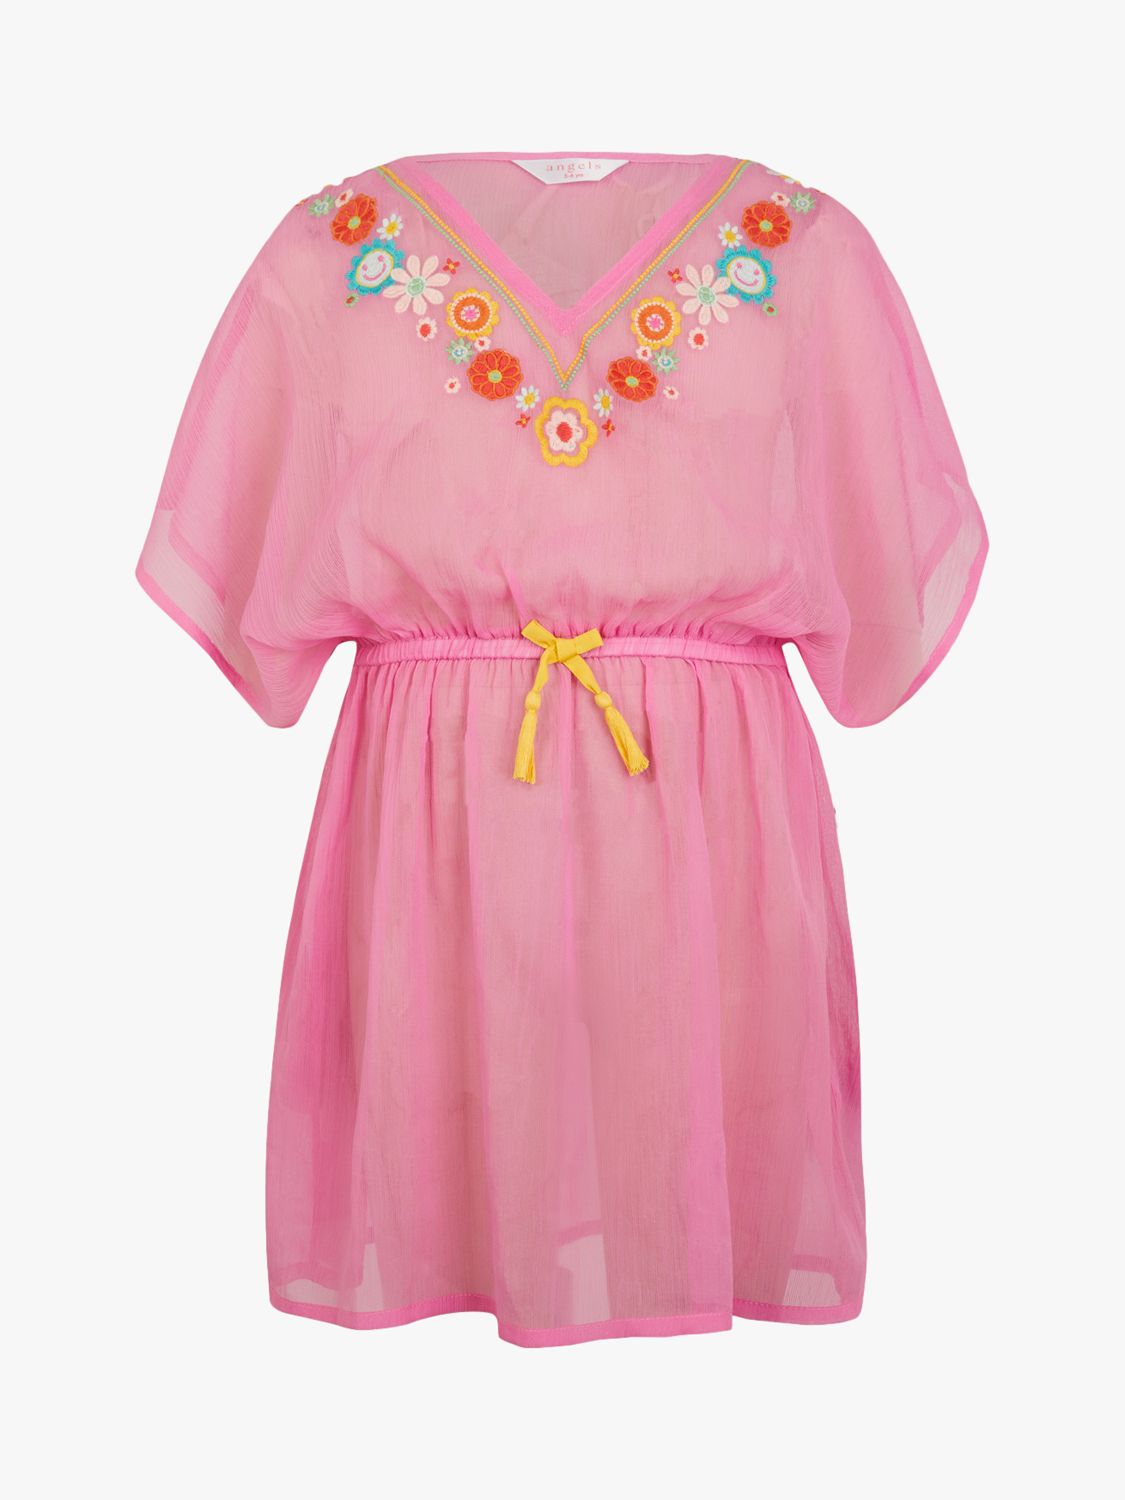 Accessorize Kids' Embroidered Kaftan, Pink, 3-4 years